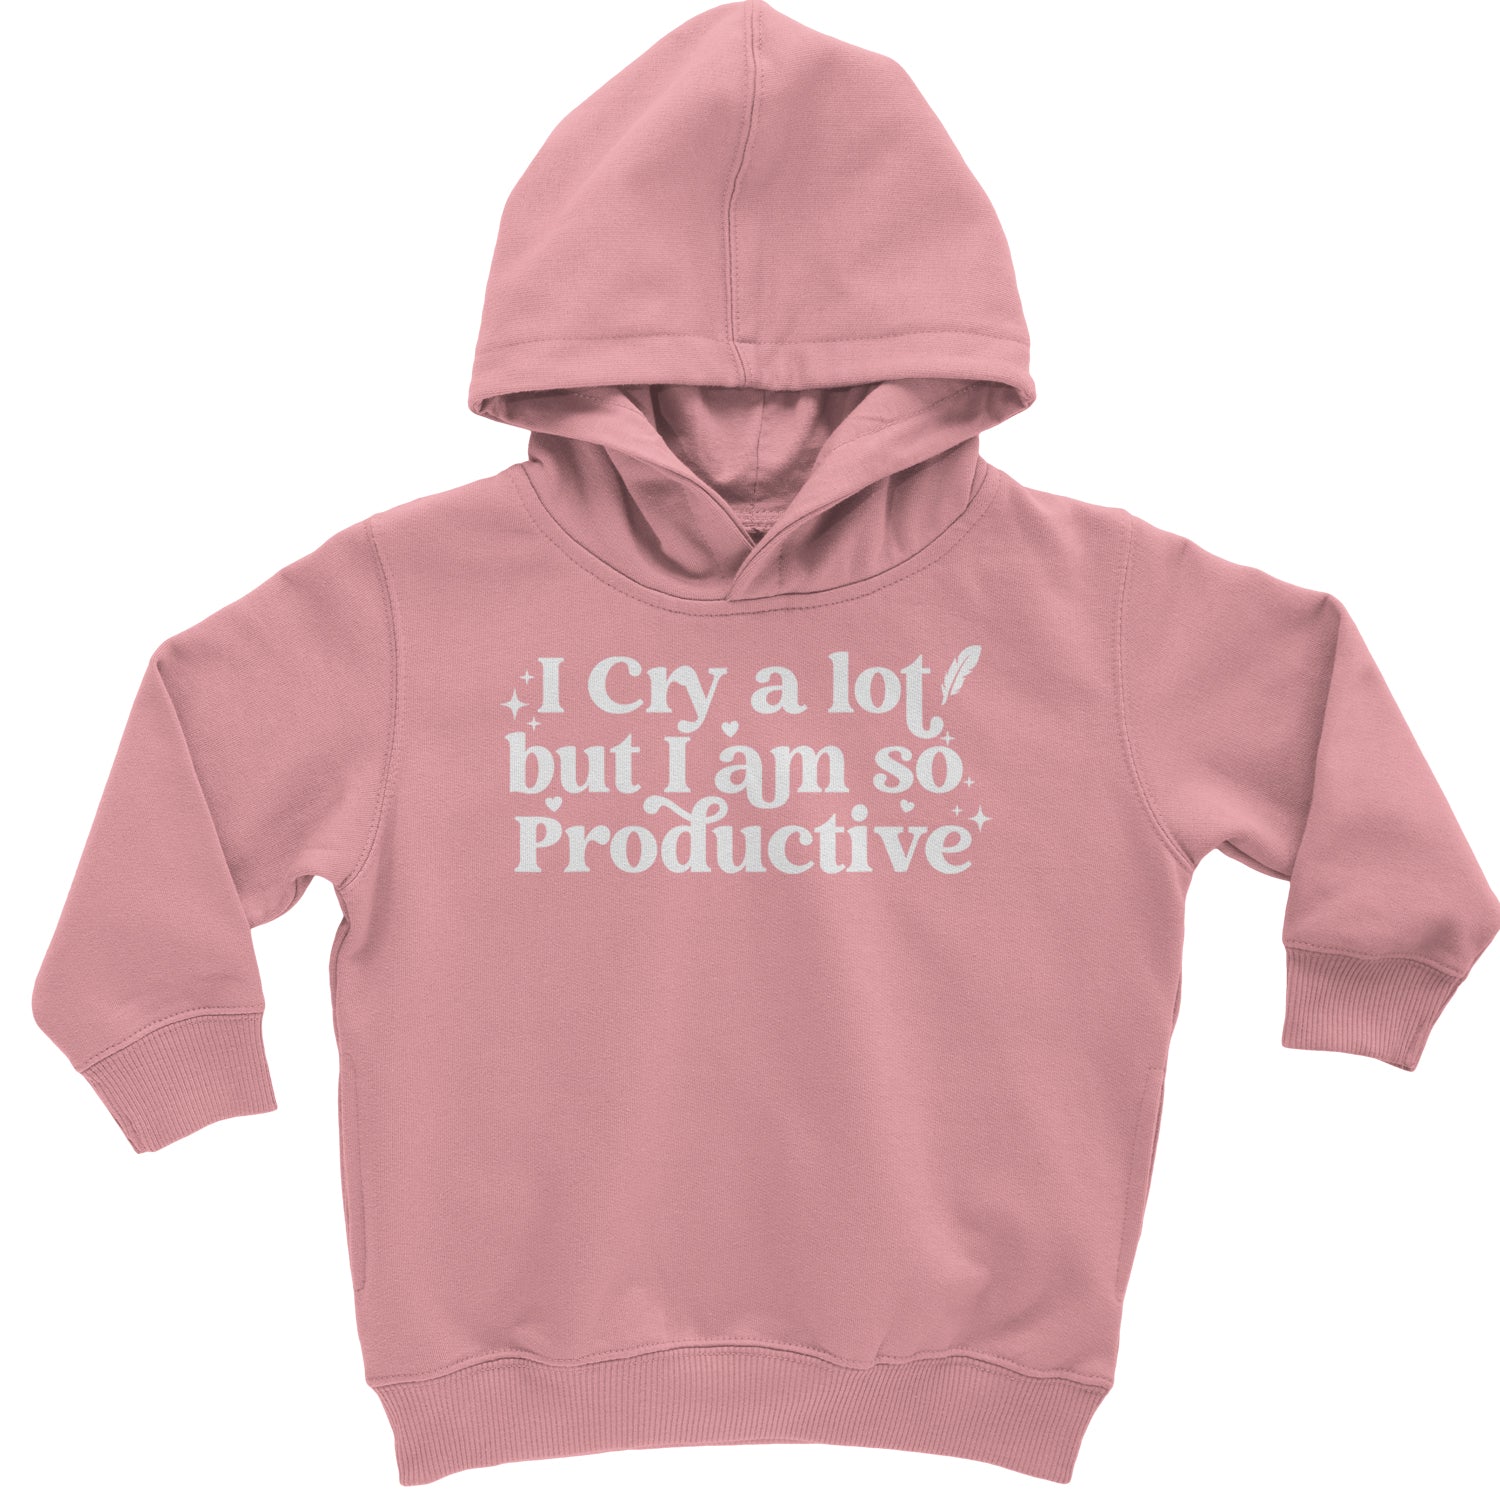 I Cry A Lot But I am So Productive TTPD Toddler Hoodie And Infant Fleece Romper